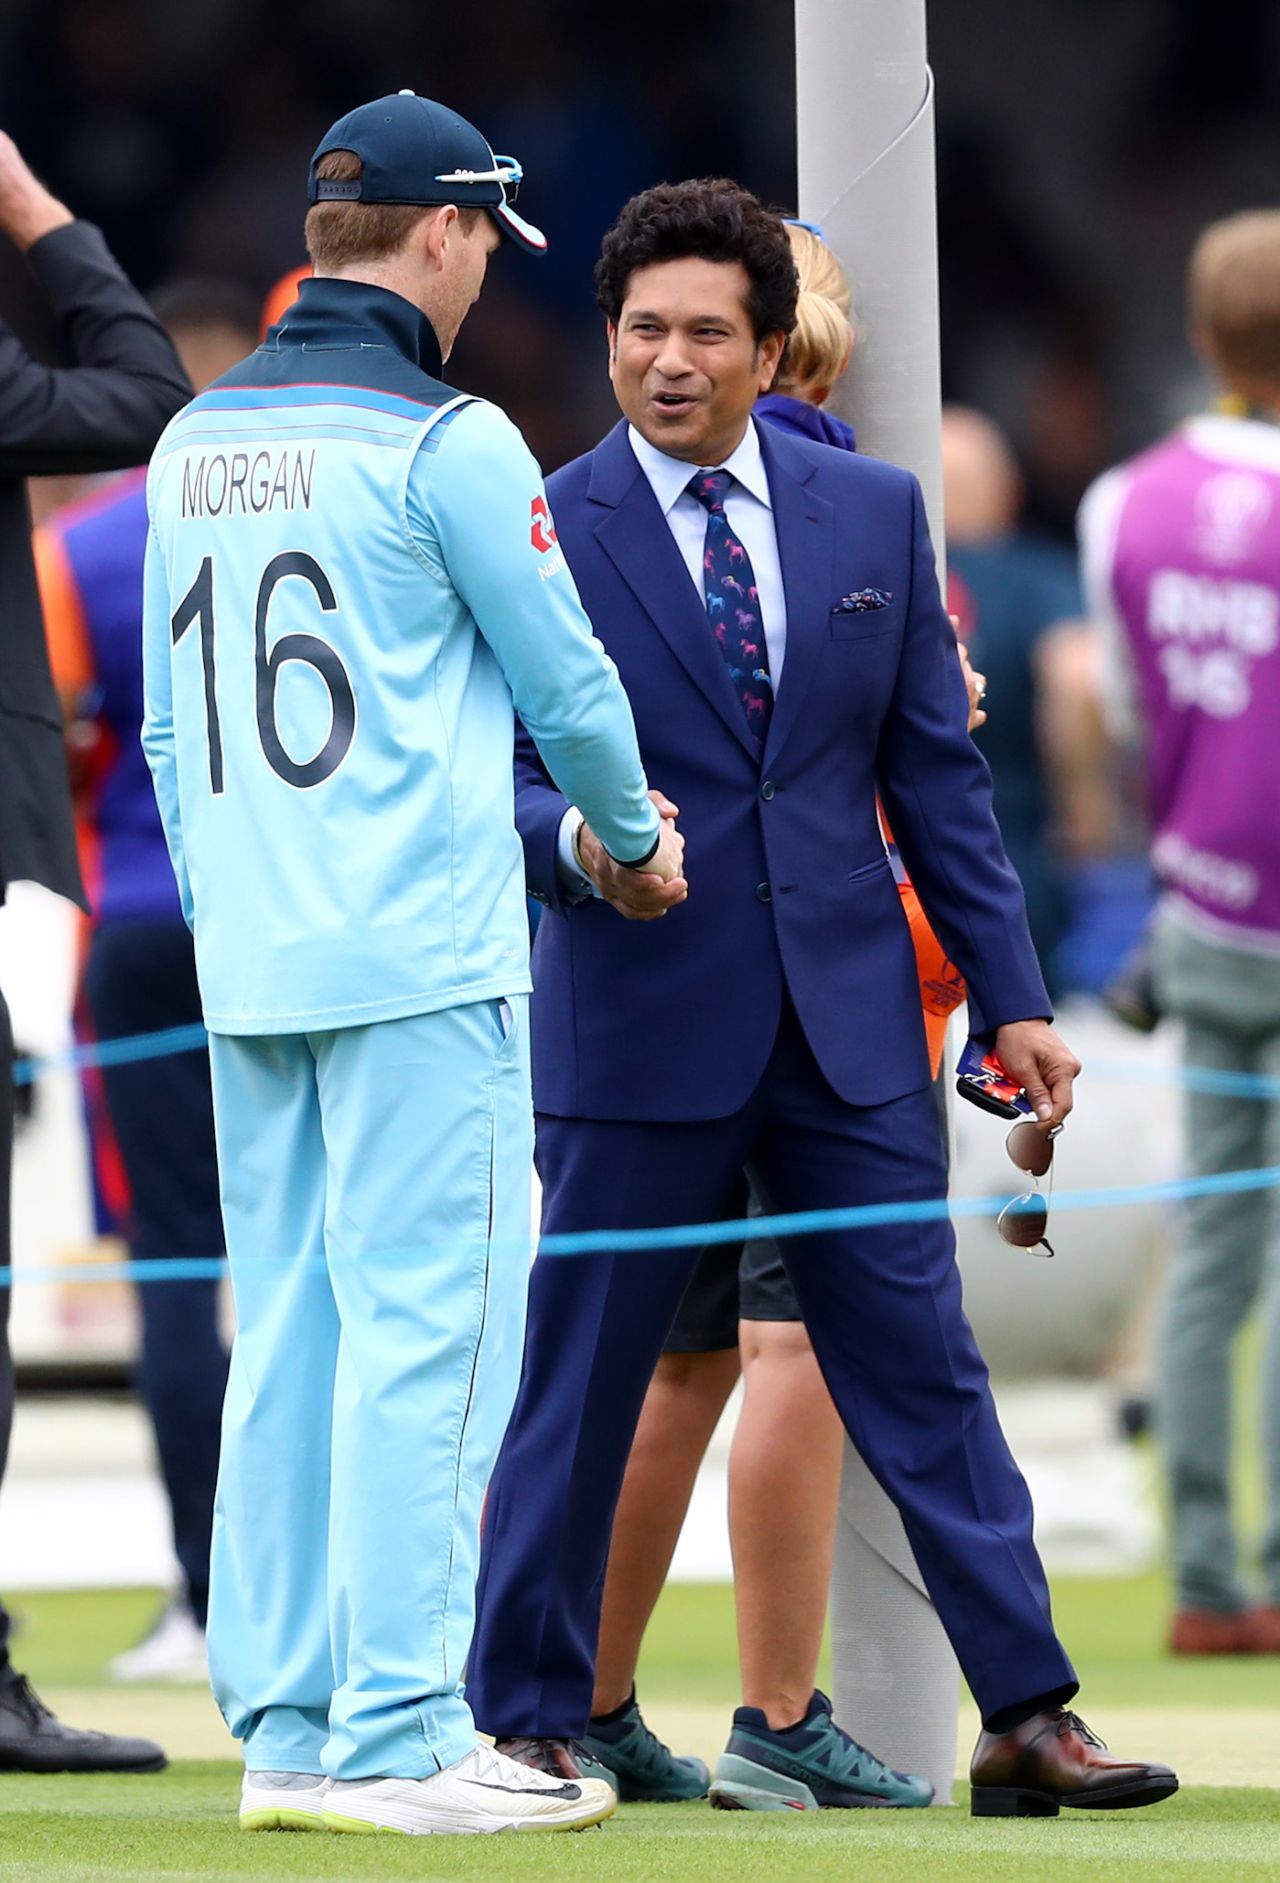 Sachin Tendulkar and Eoin Morgan catch up before the game, England v New Zealand, World Cup 2019, Lord's, July 14, 2019